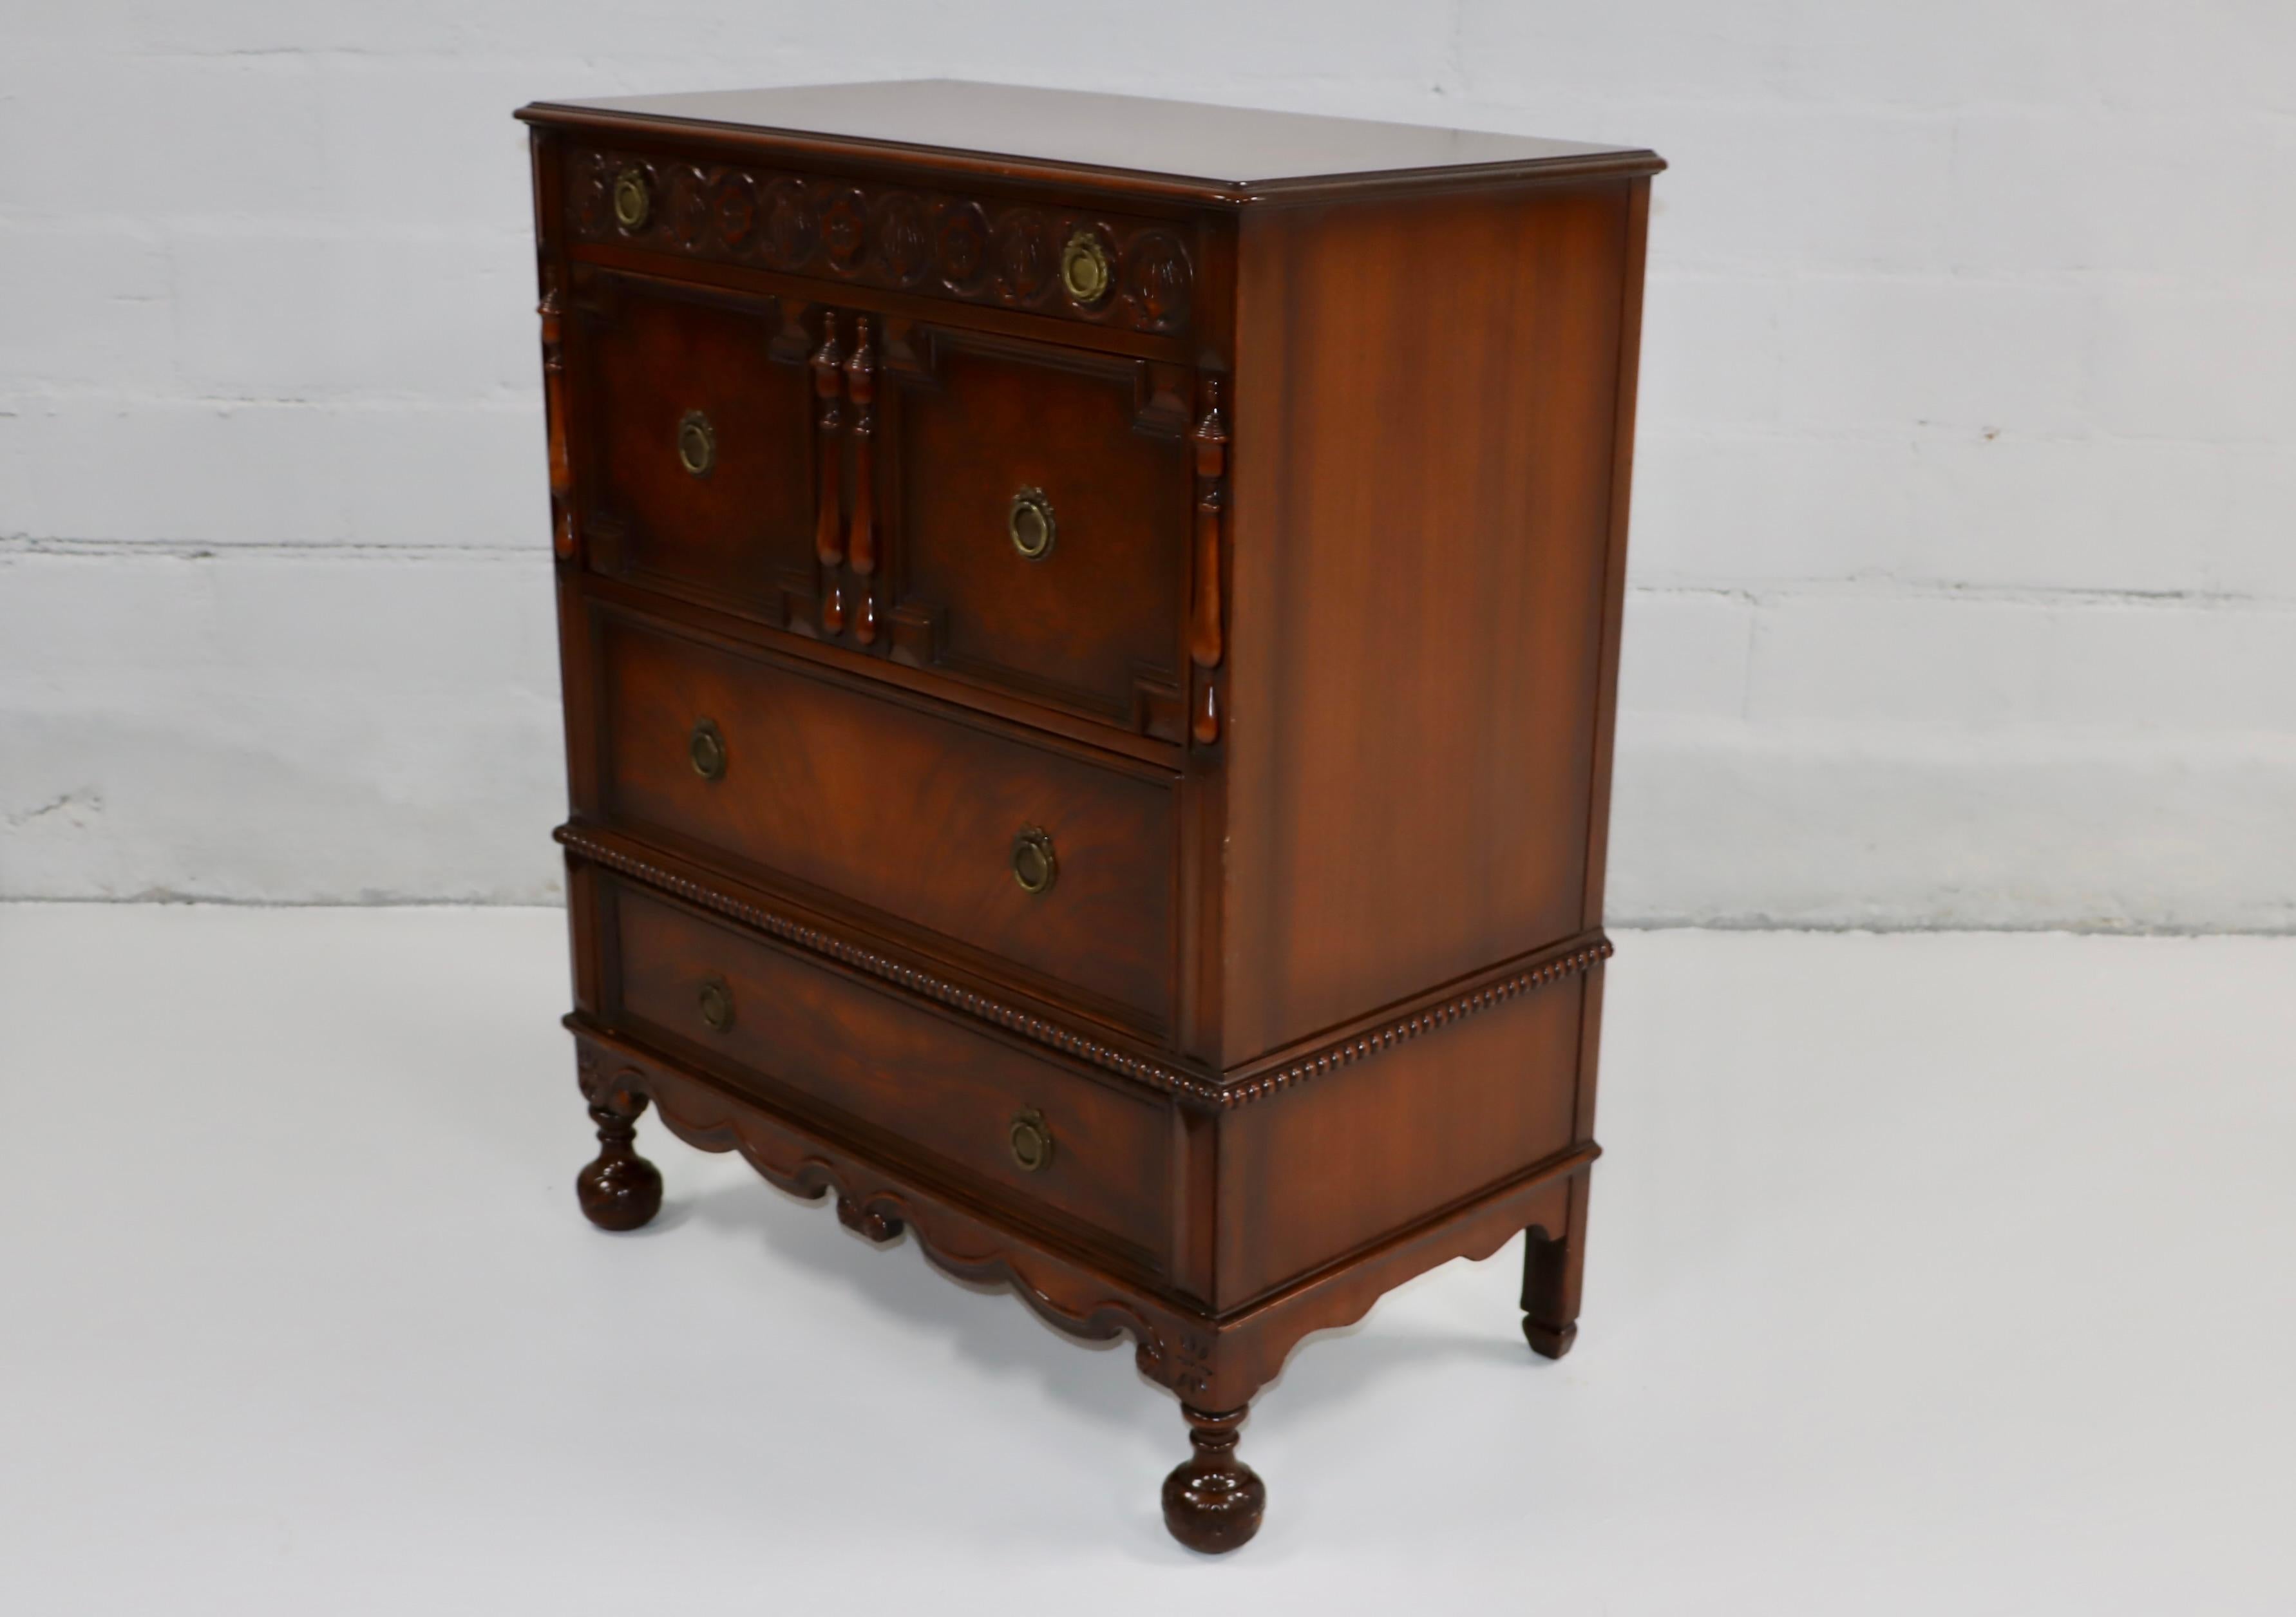 1940's walnut and mahogany 4 drawer dresser by Berkey & Gay Furniture, with beautiful carved wood detail and solid brass hardware, still retail the original jewelry tray and label, there is some wear and patina due to age and use. 